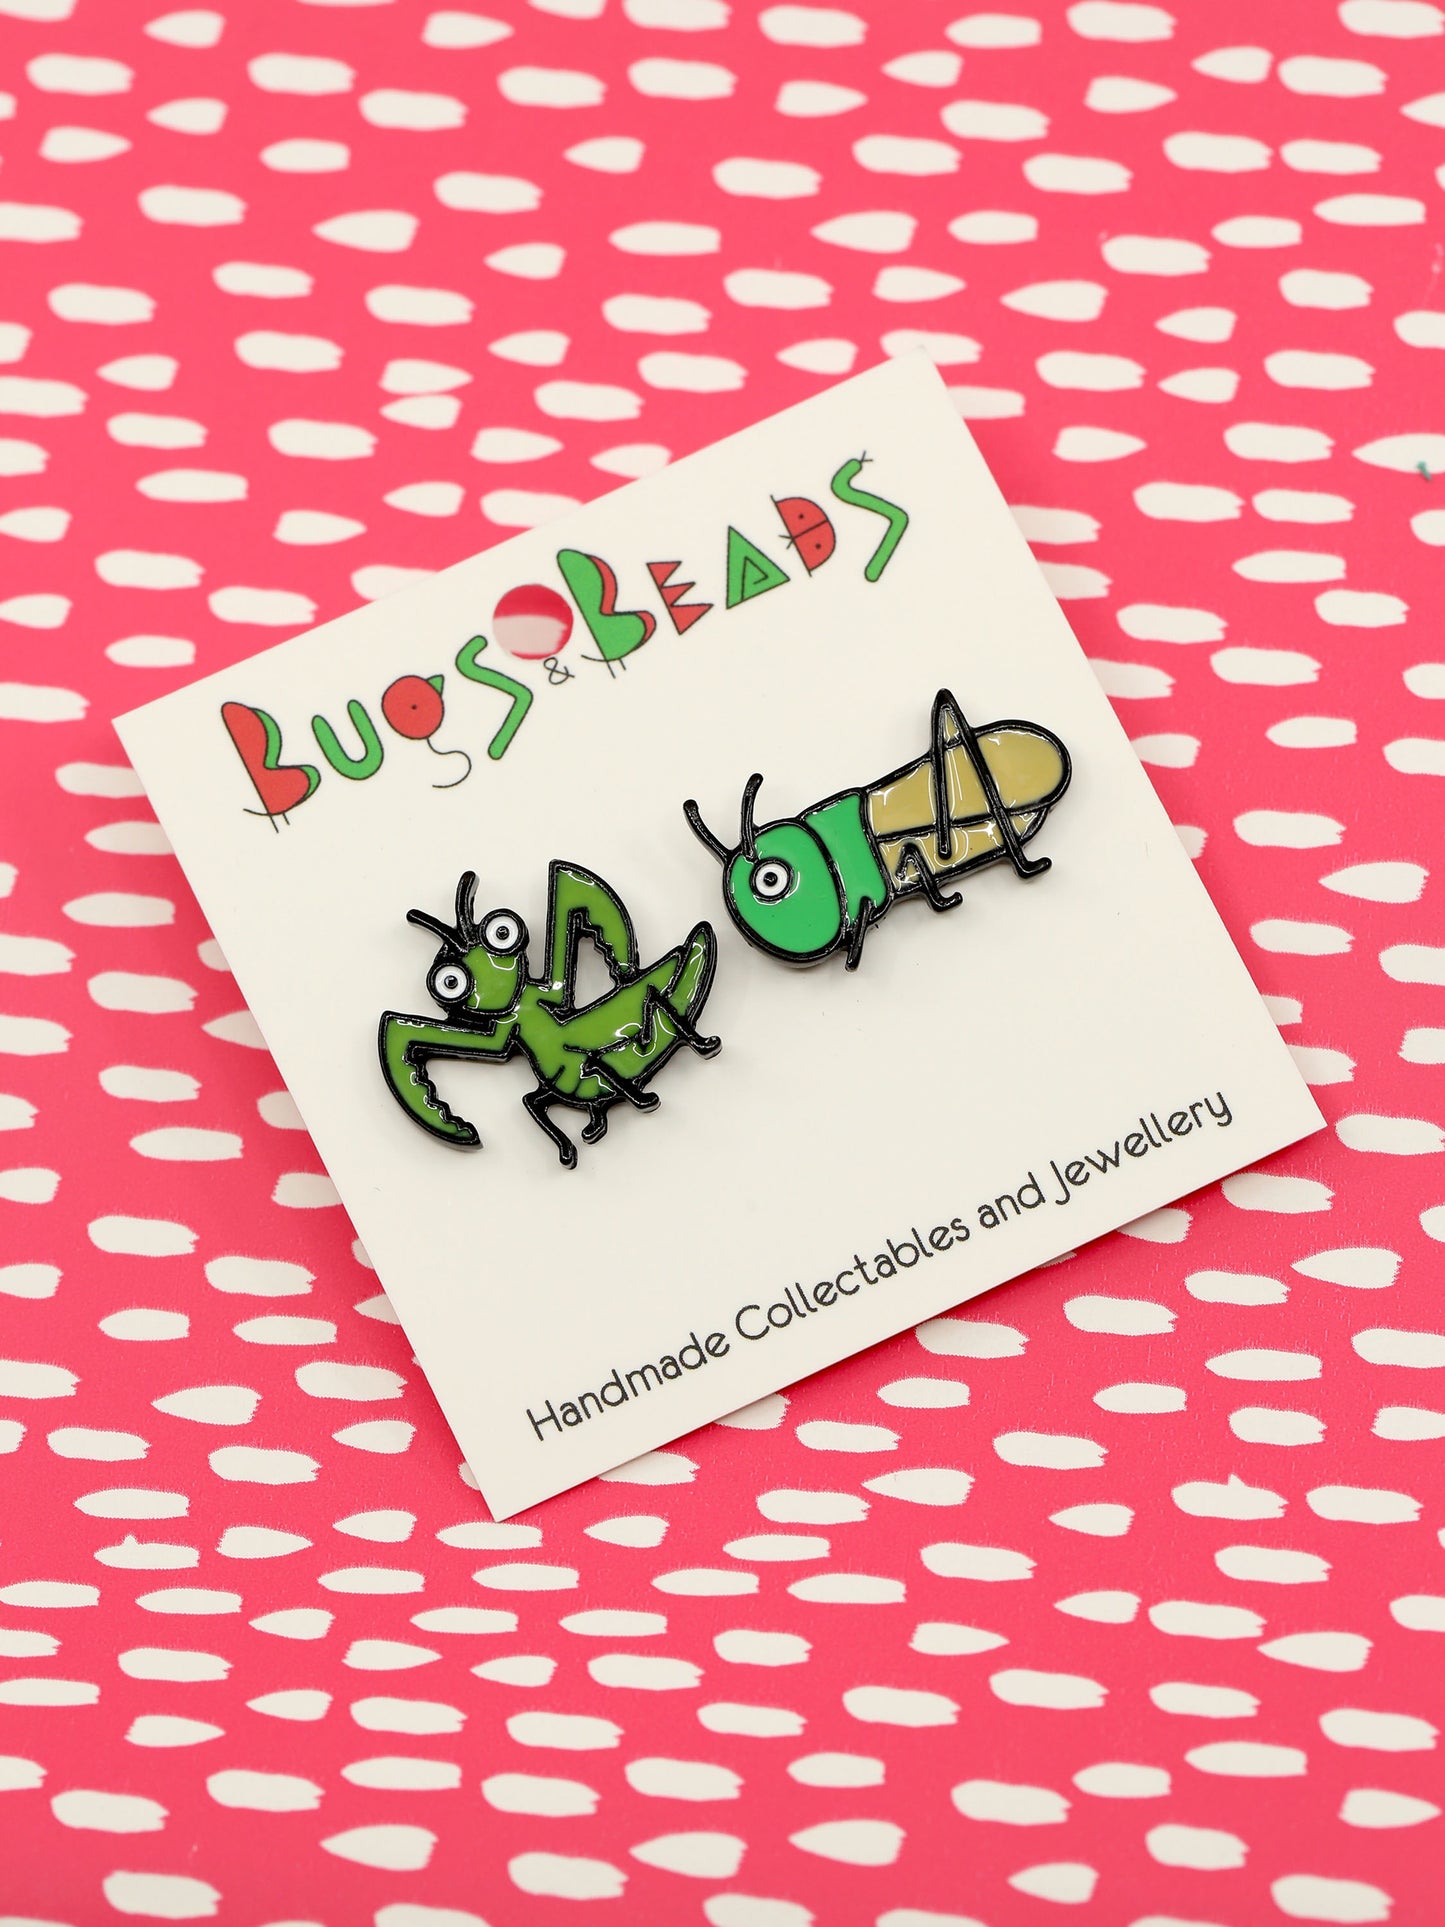 Mantis and Grasshopper Together pin